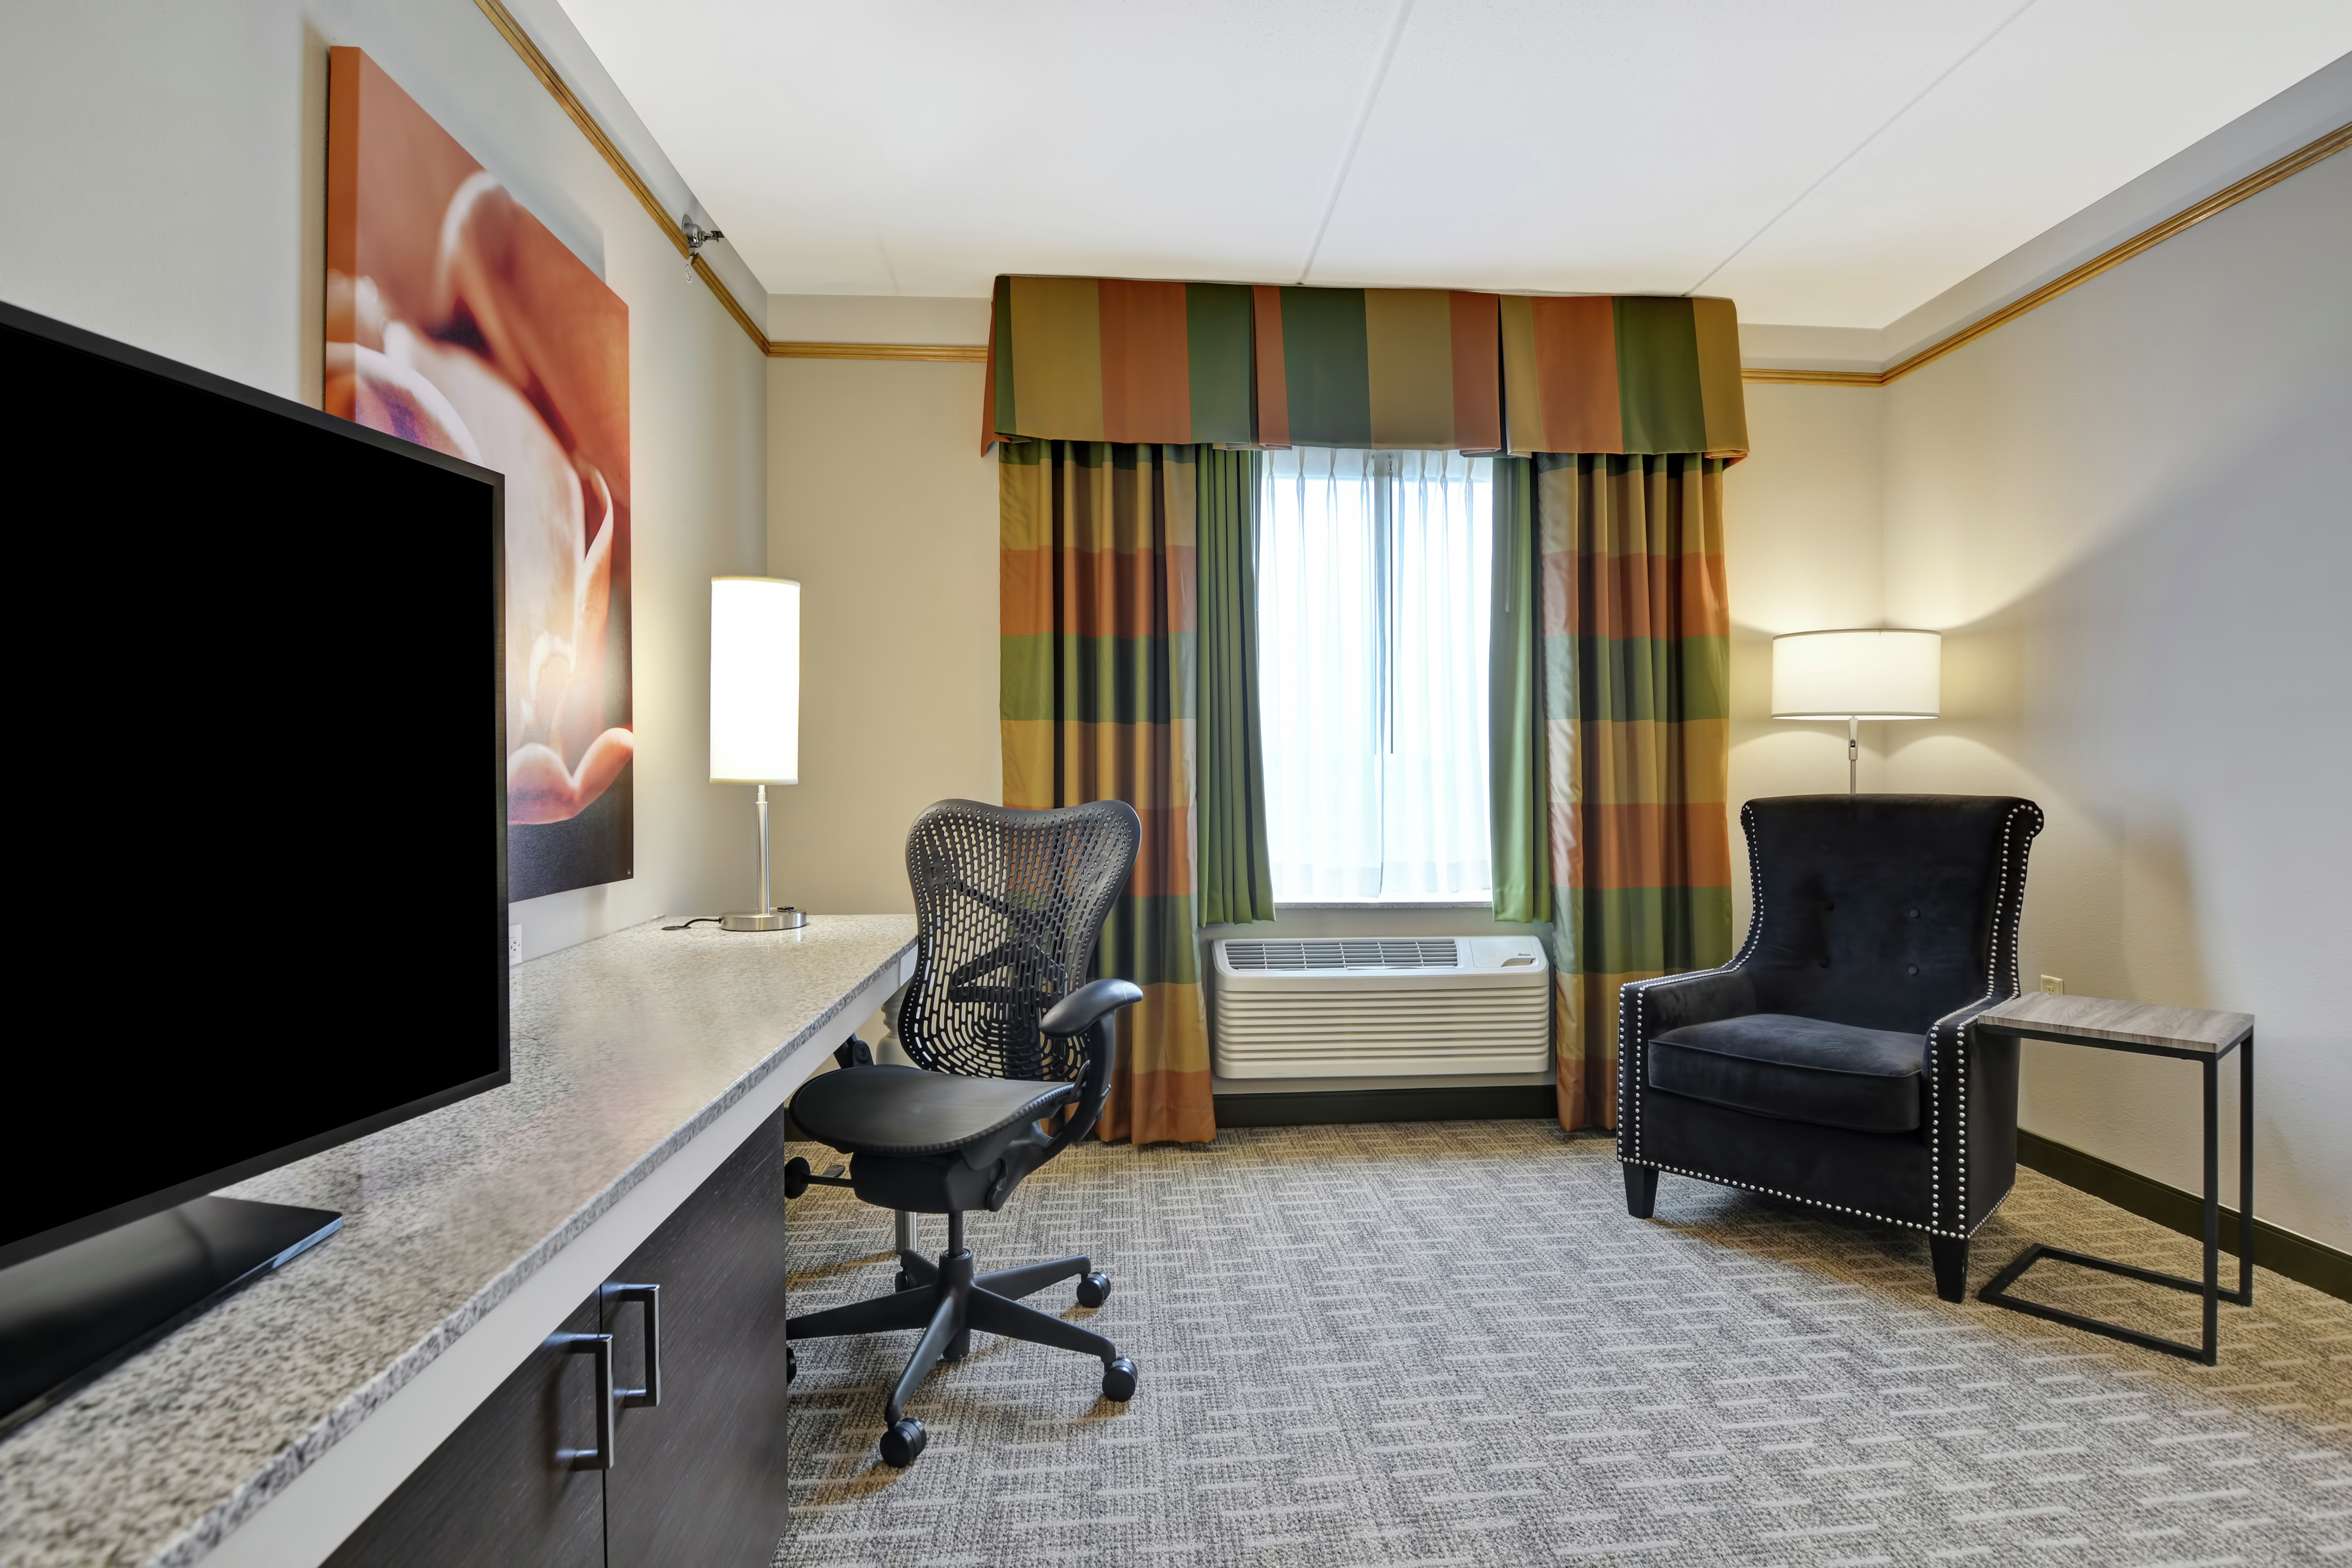 Guest Room Lounge Area and Amenities